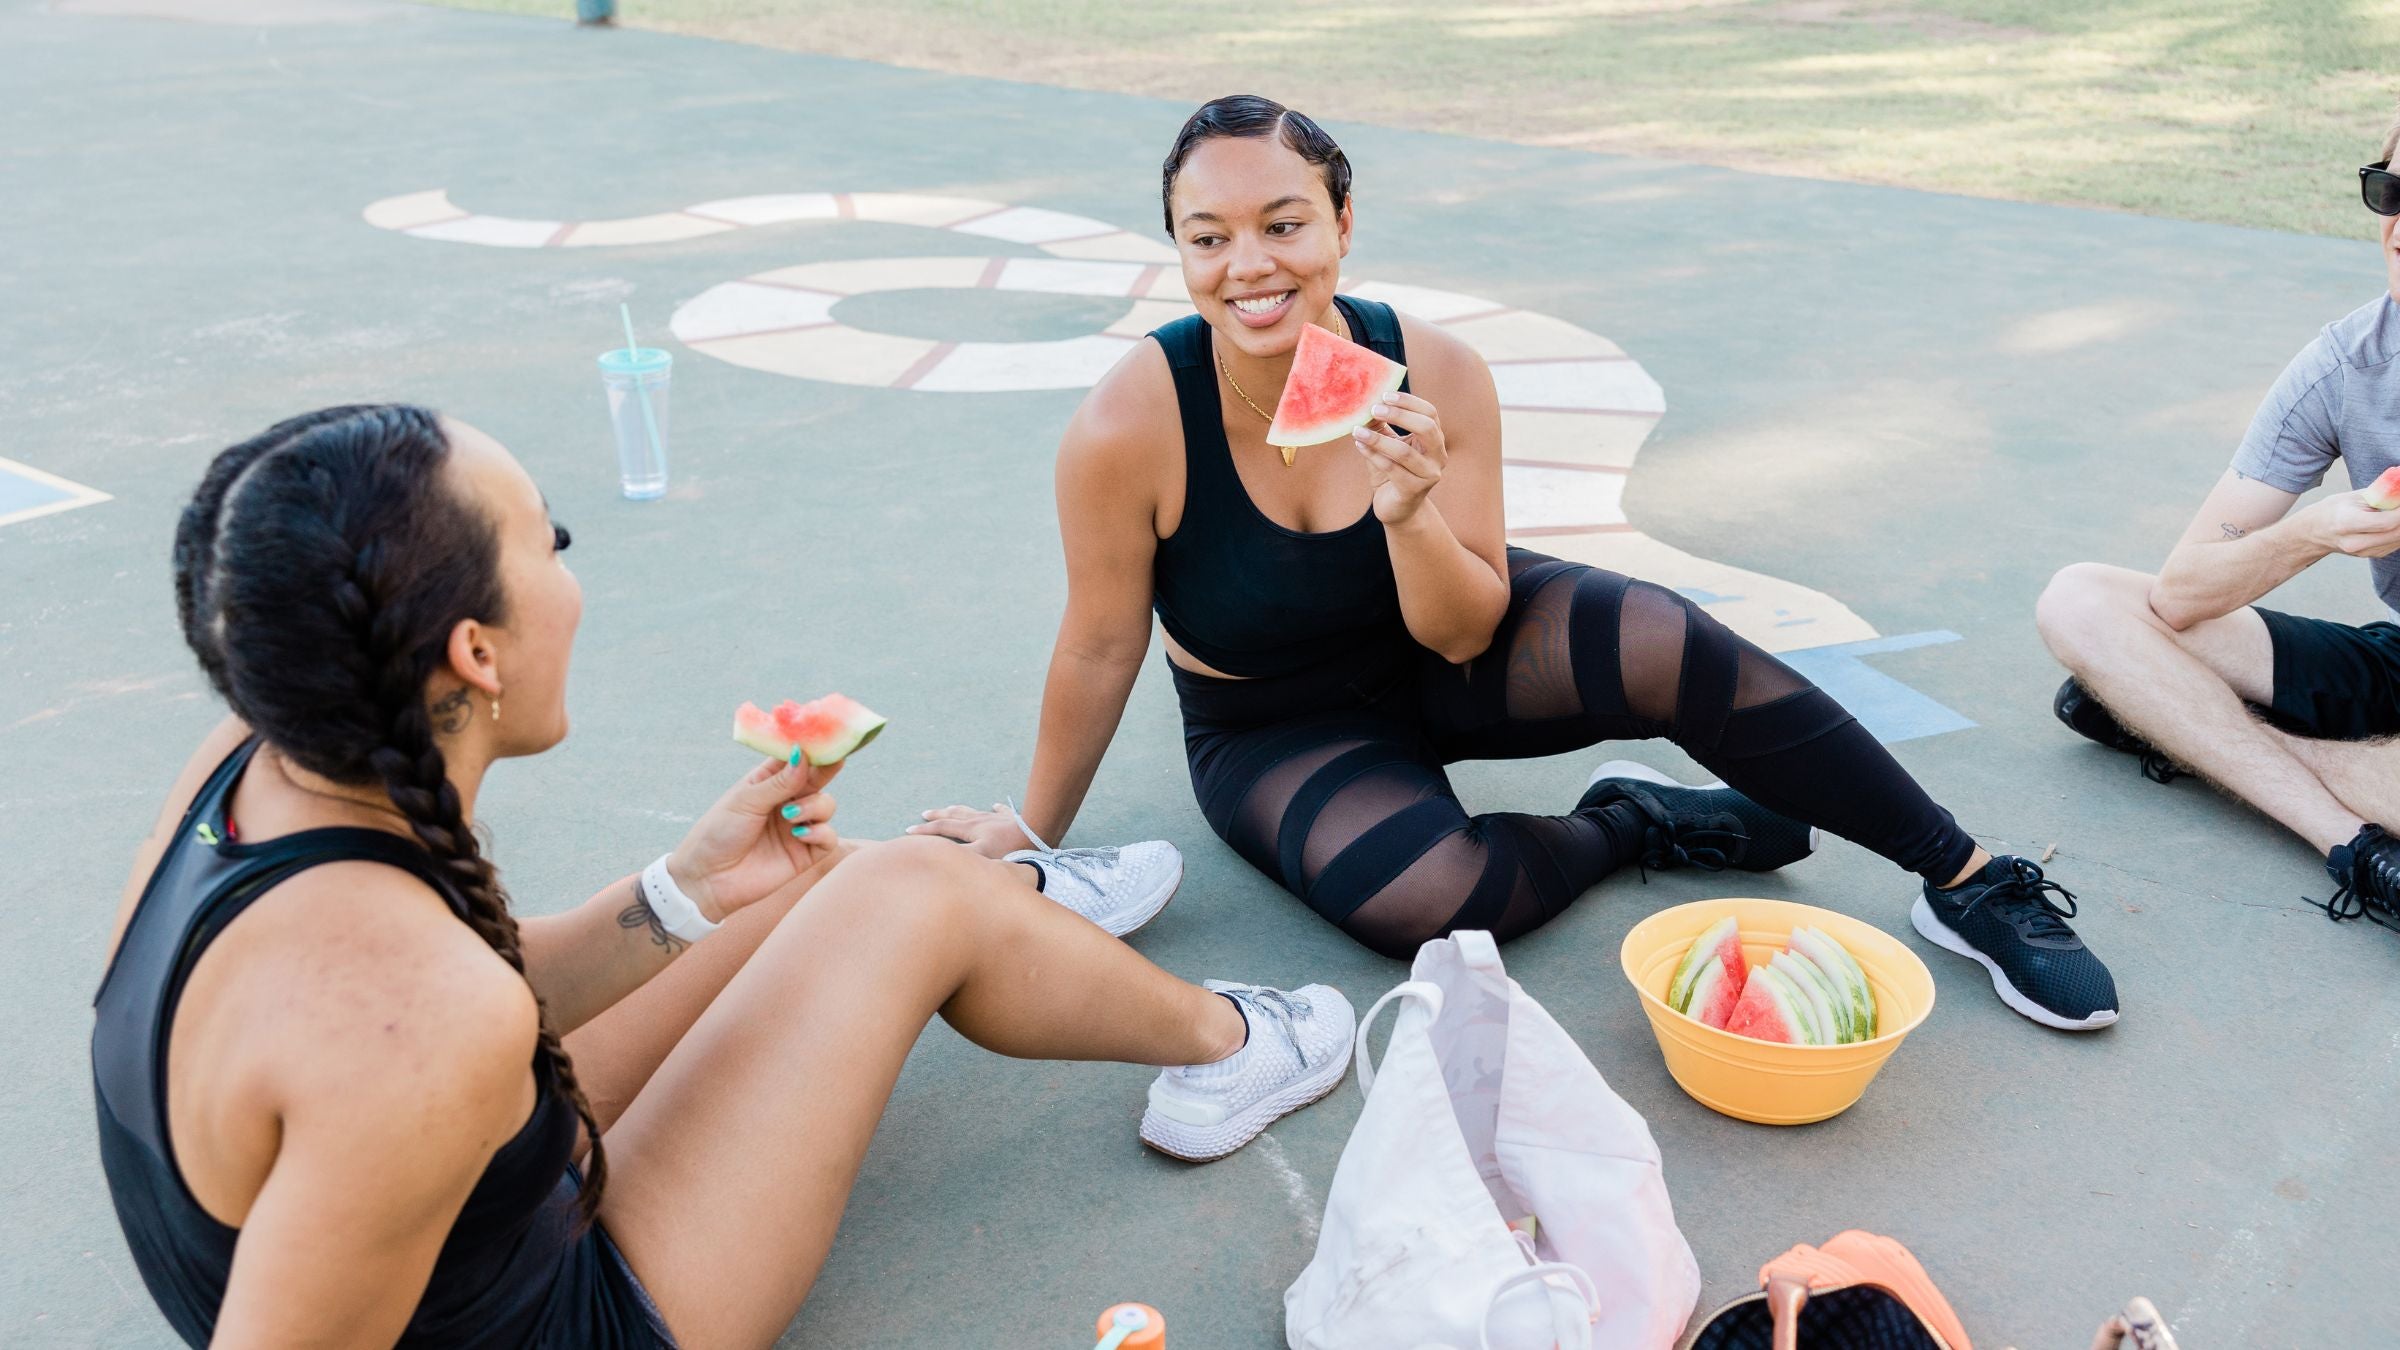 Athletes eat after a workout following a meal plan for triathletes